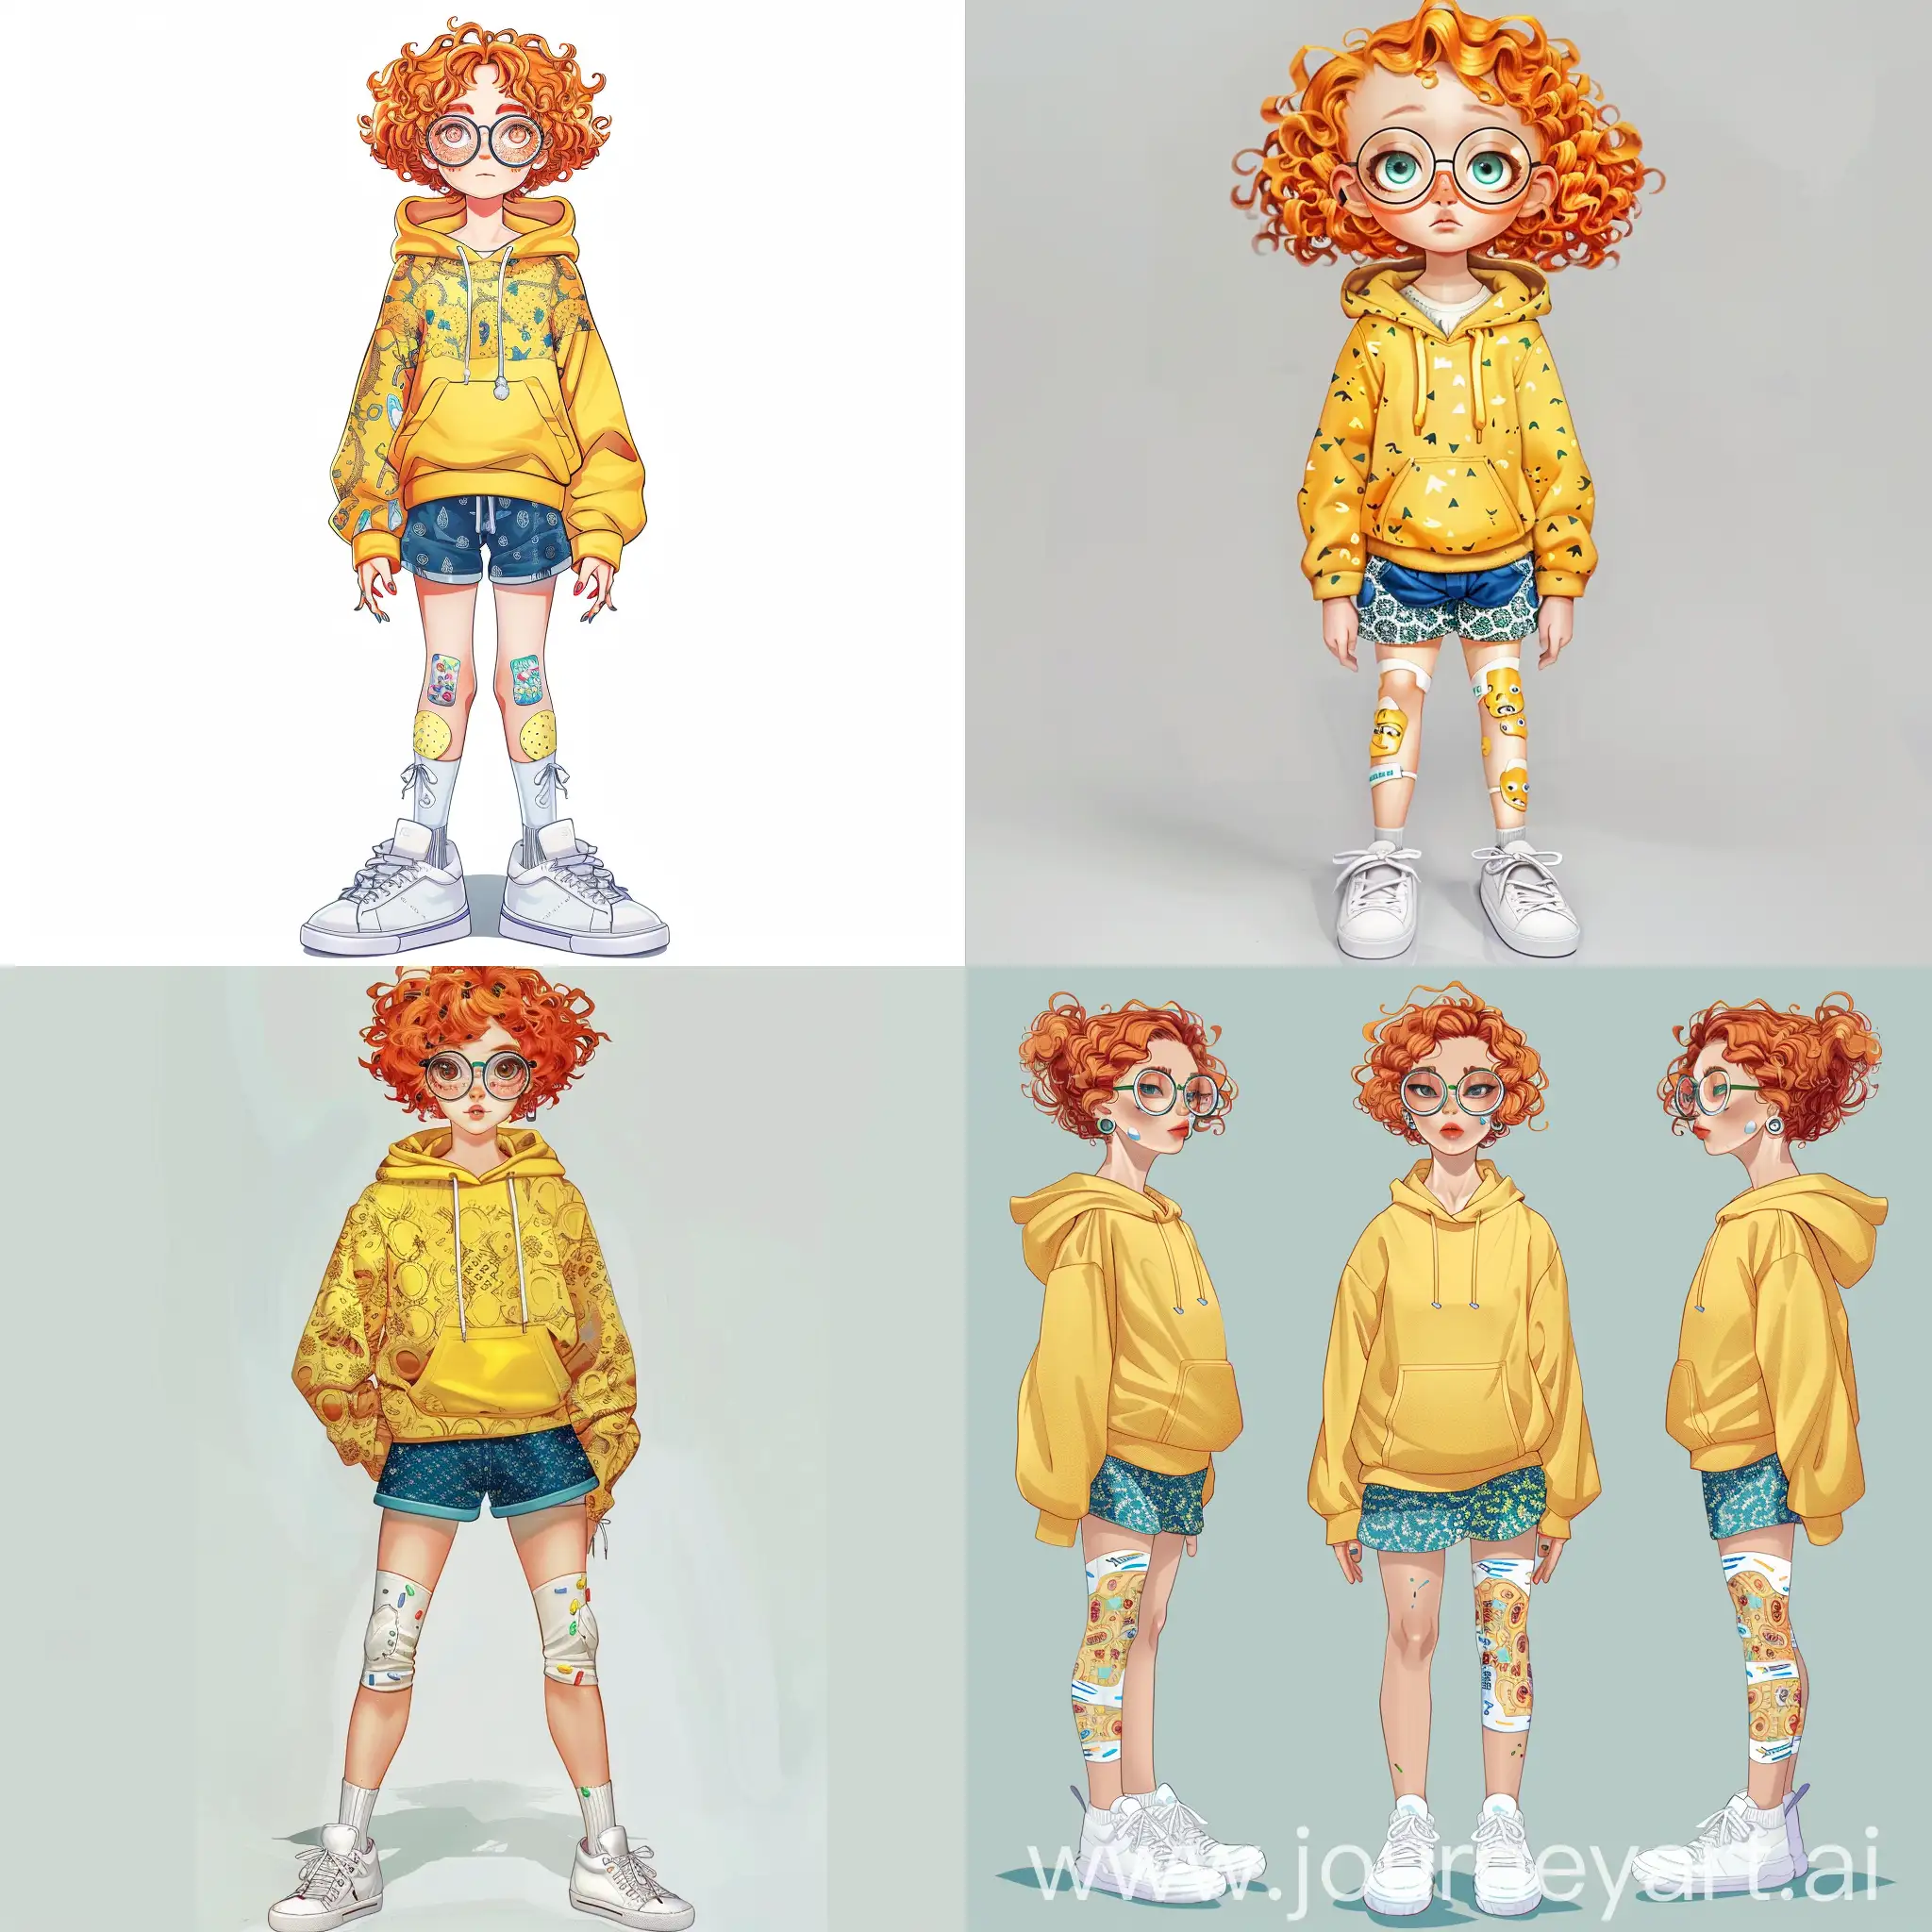 Adorable-Anime-Girl-with-Orange-Curly-Hair-and-Stylish-Outfit